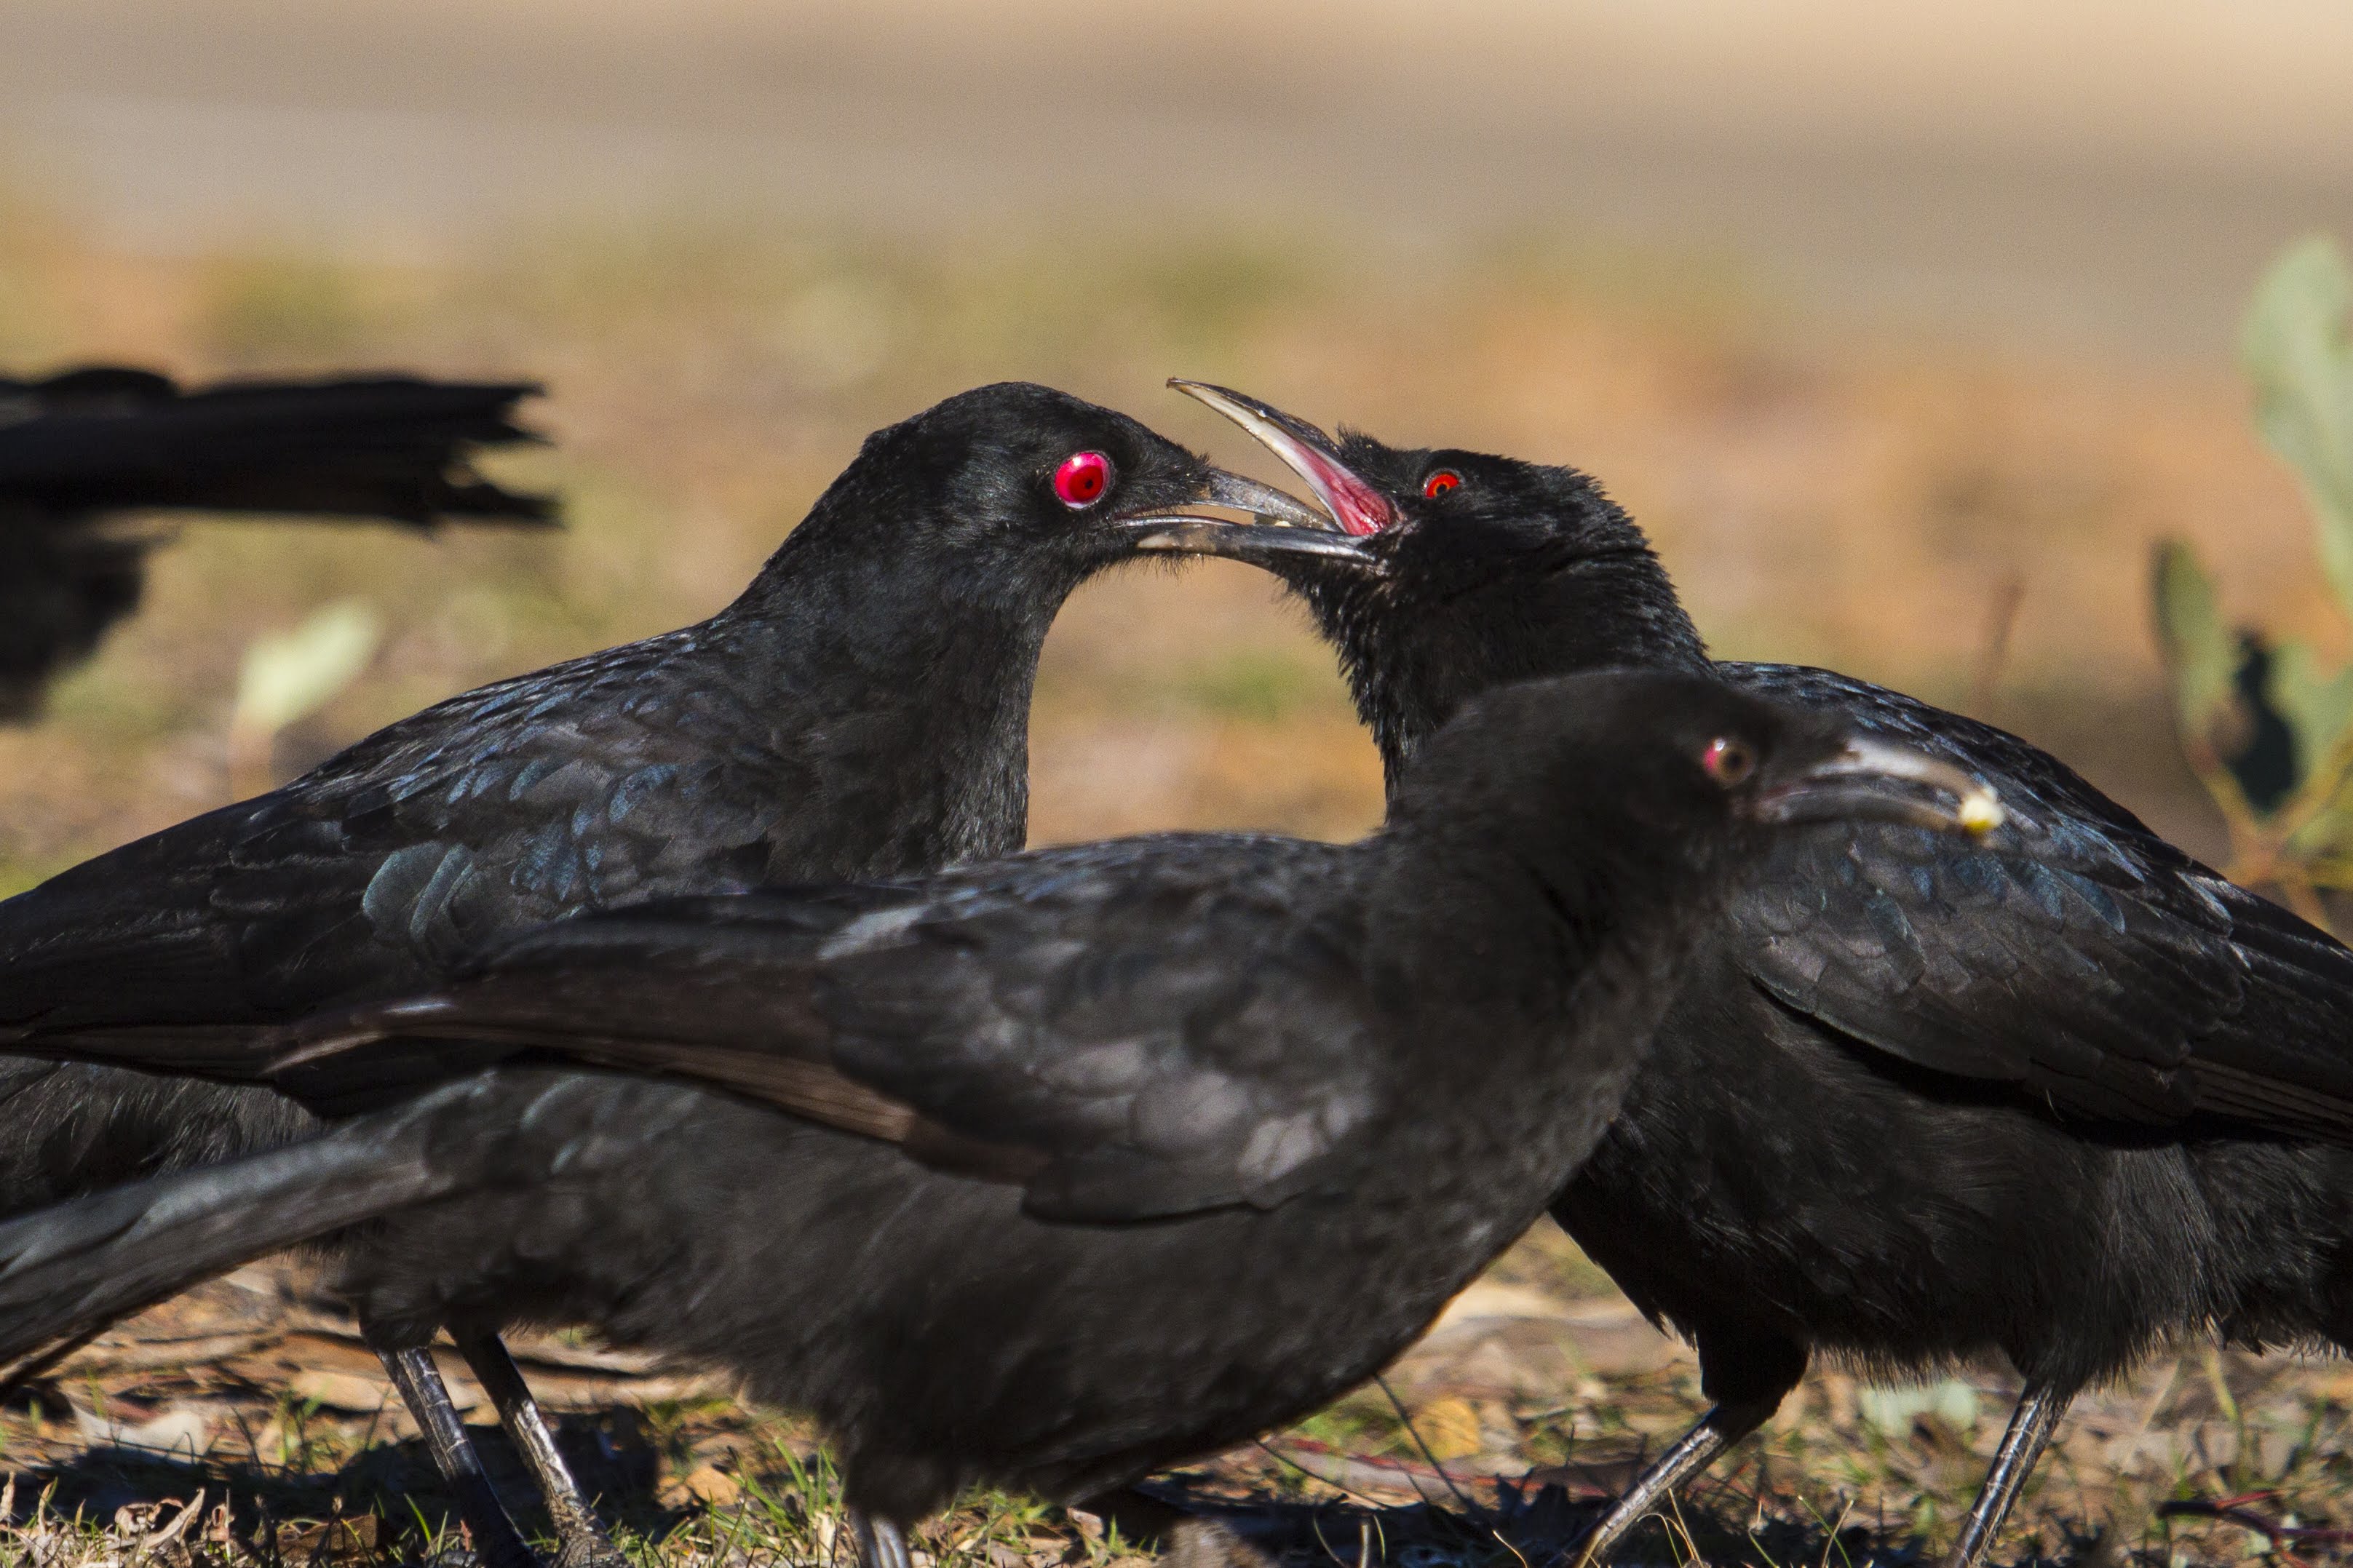 A photo of choughs being highly social, taken by Dr Connie Leon.